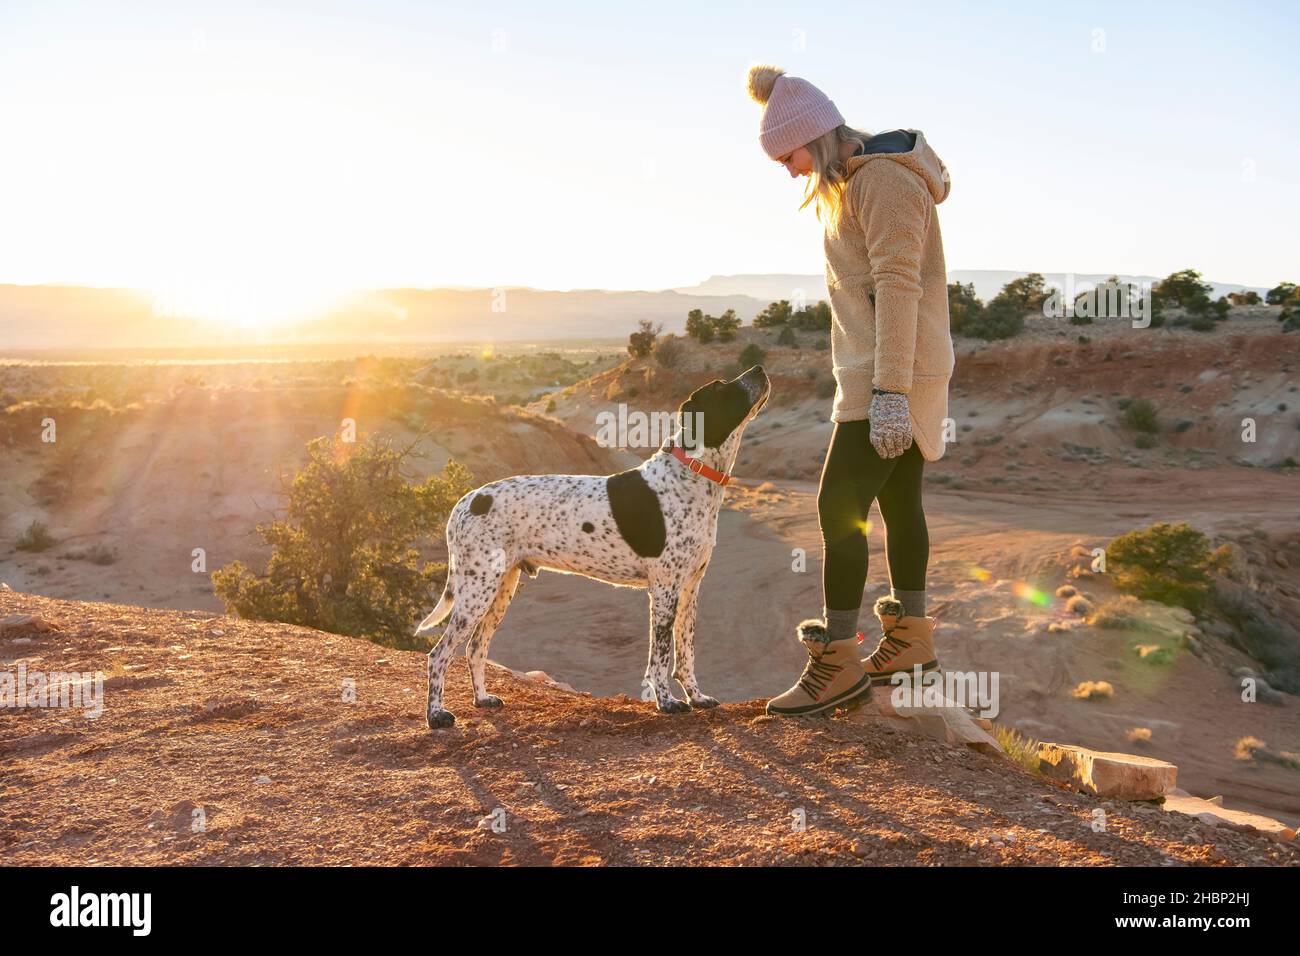 female hiker looking at dog while standing in desert during sunset Stock Photo